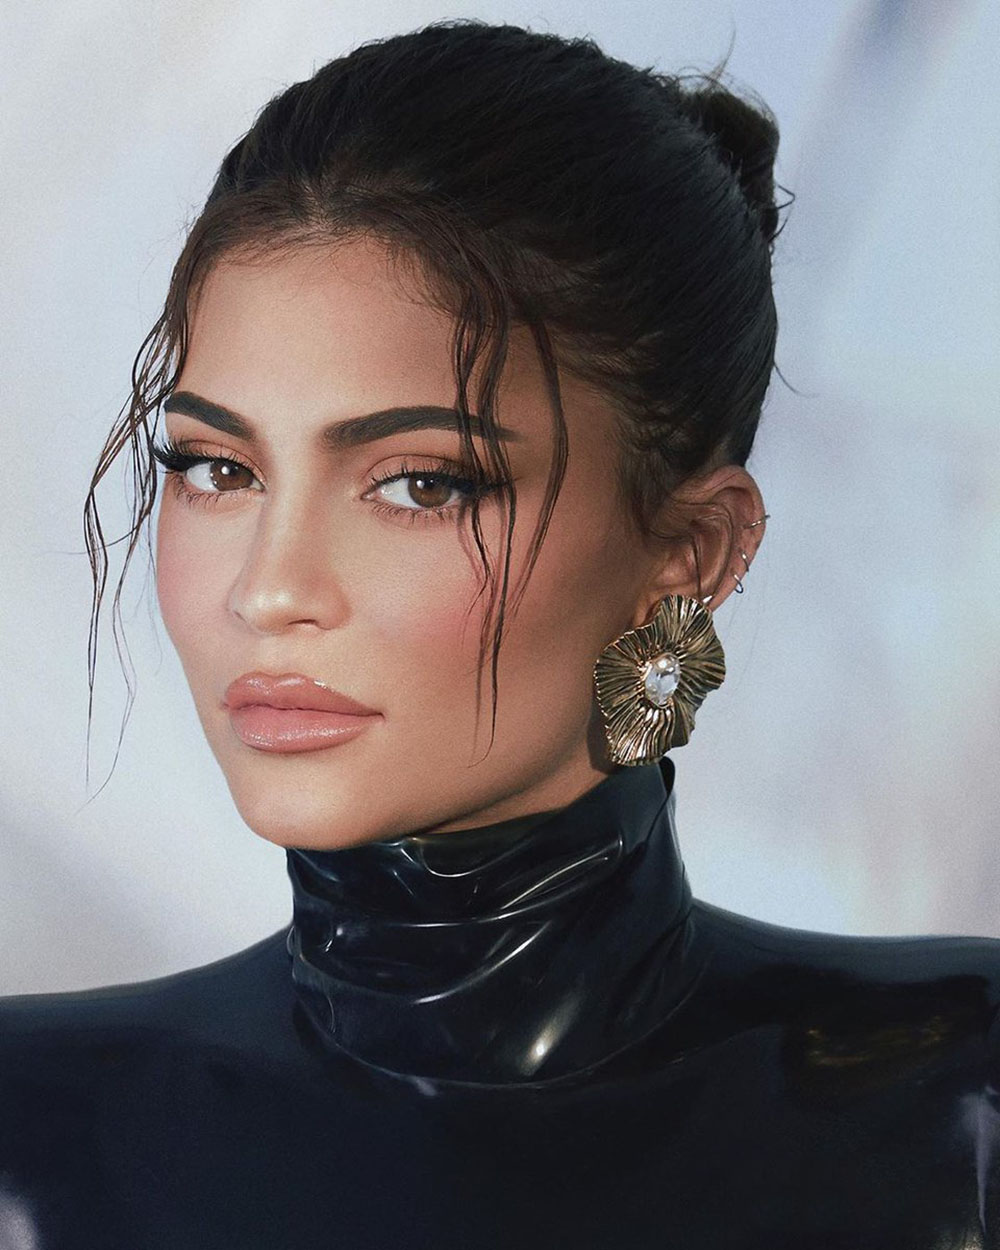 Kylie Jenner covers Vogue Hong Kong August 2020 by Greg Swales